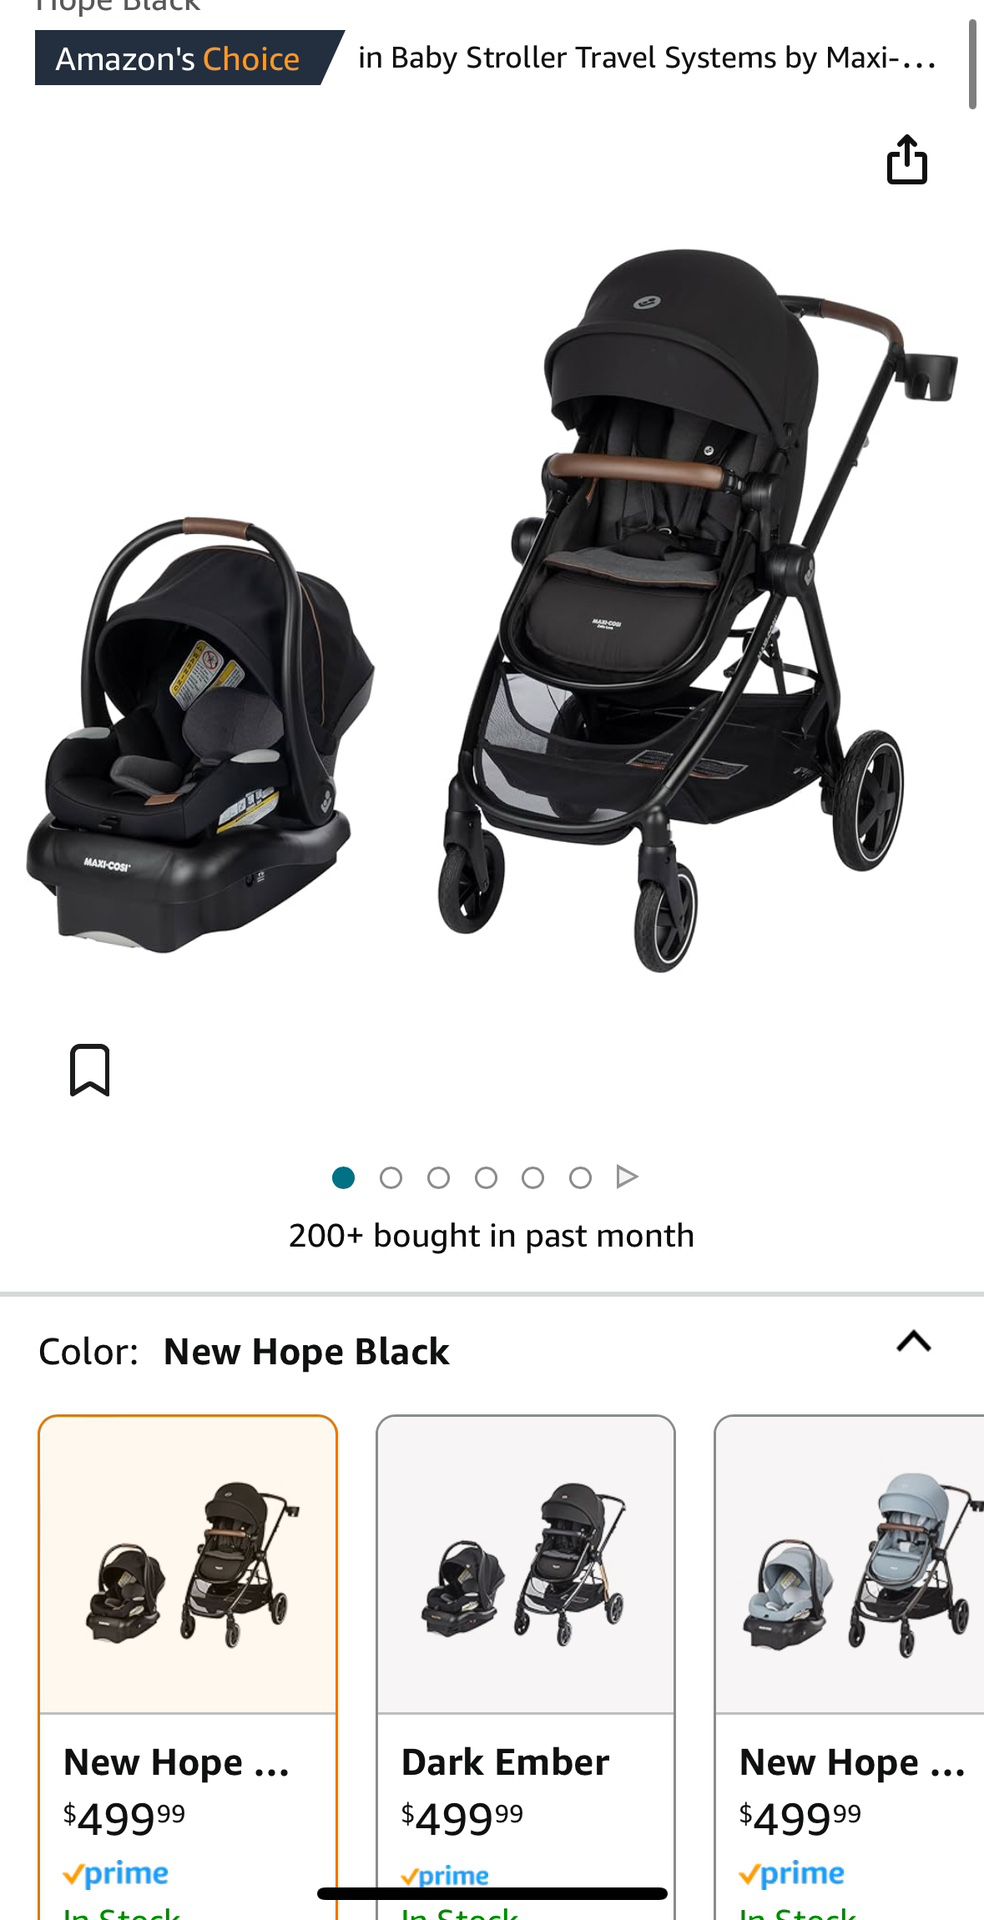 5-in-1 travel System 